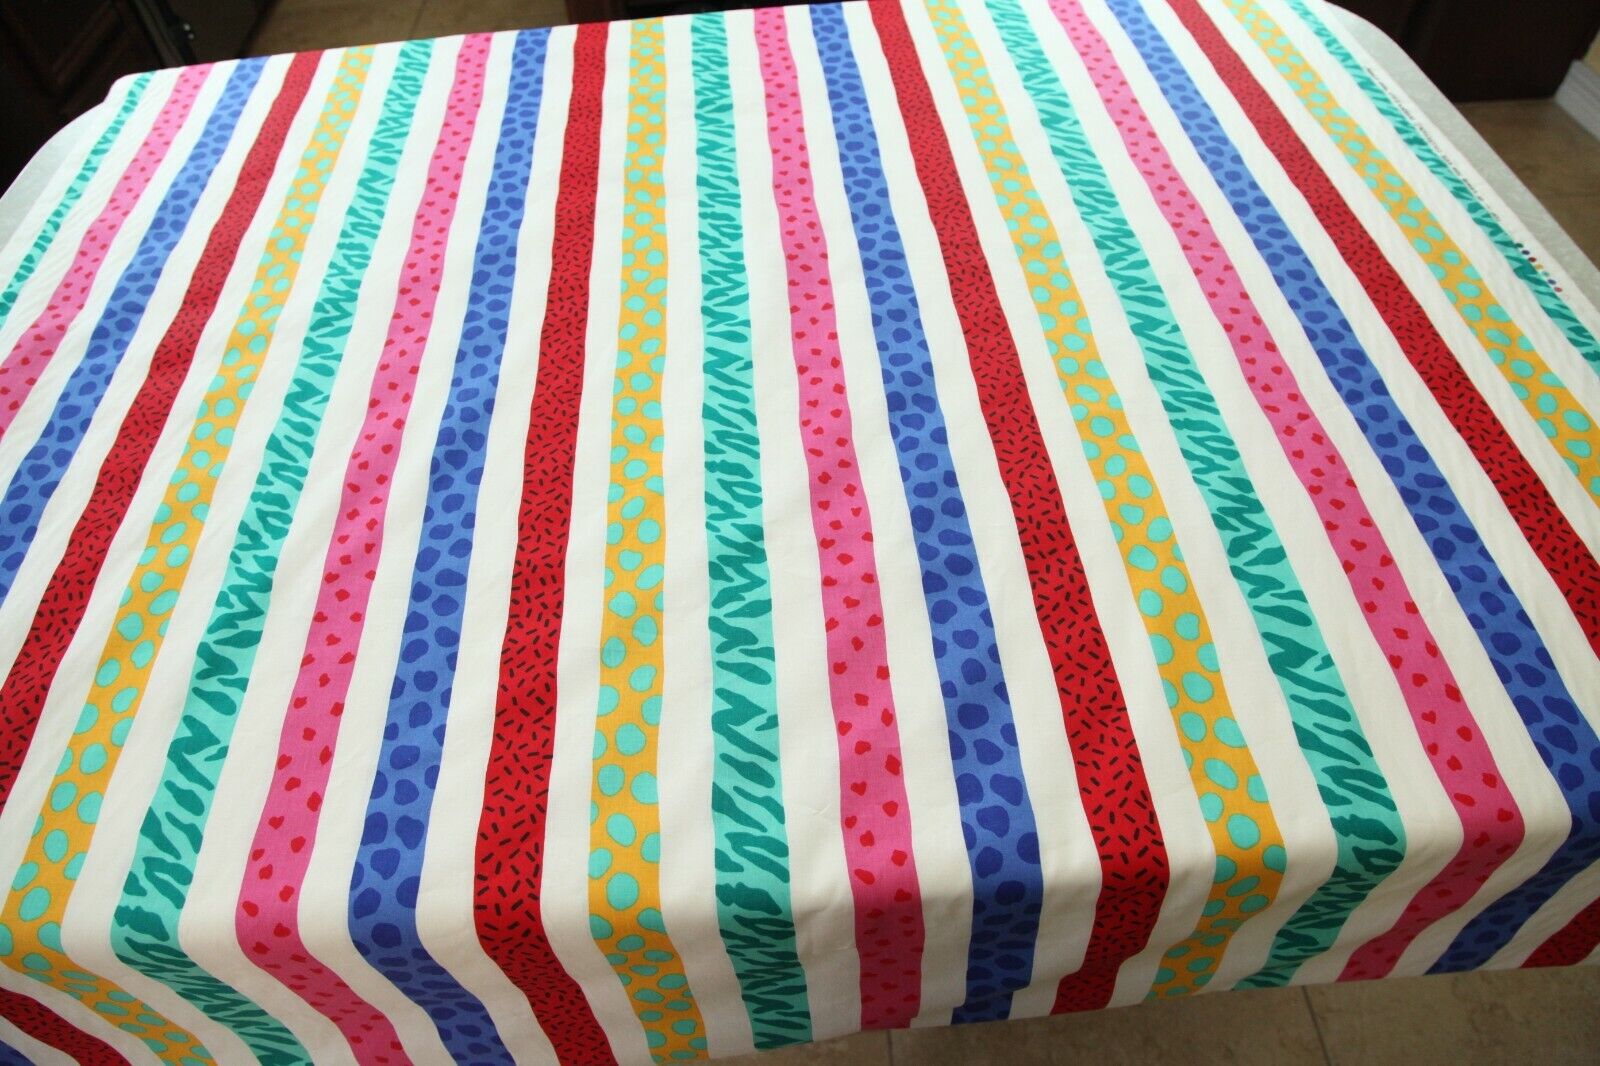 VTG Di Lewis For Kids Who Stripe Upholstery Fabric 90s Memphis Style Colorful